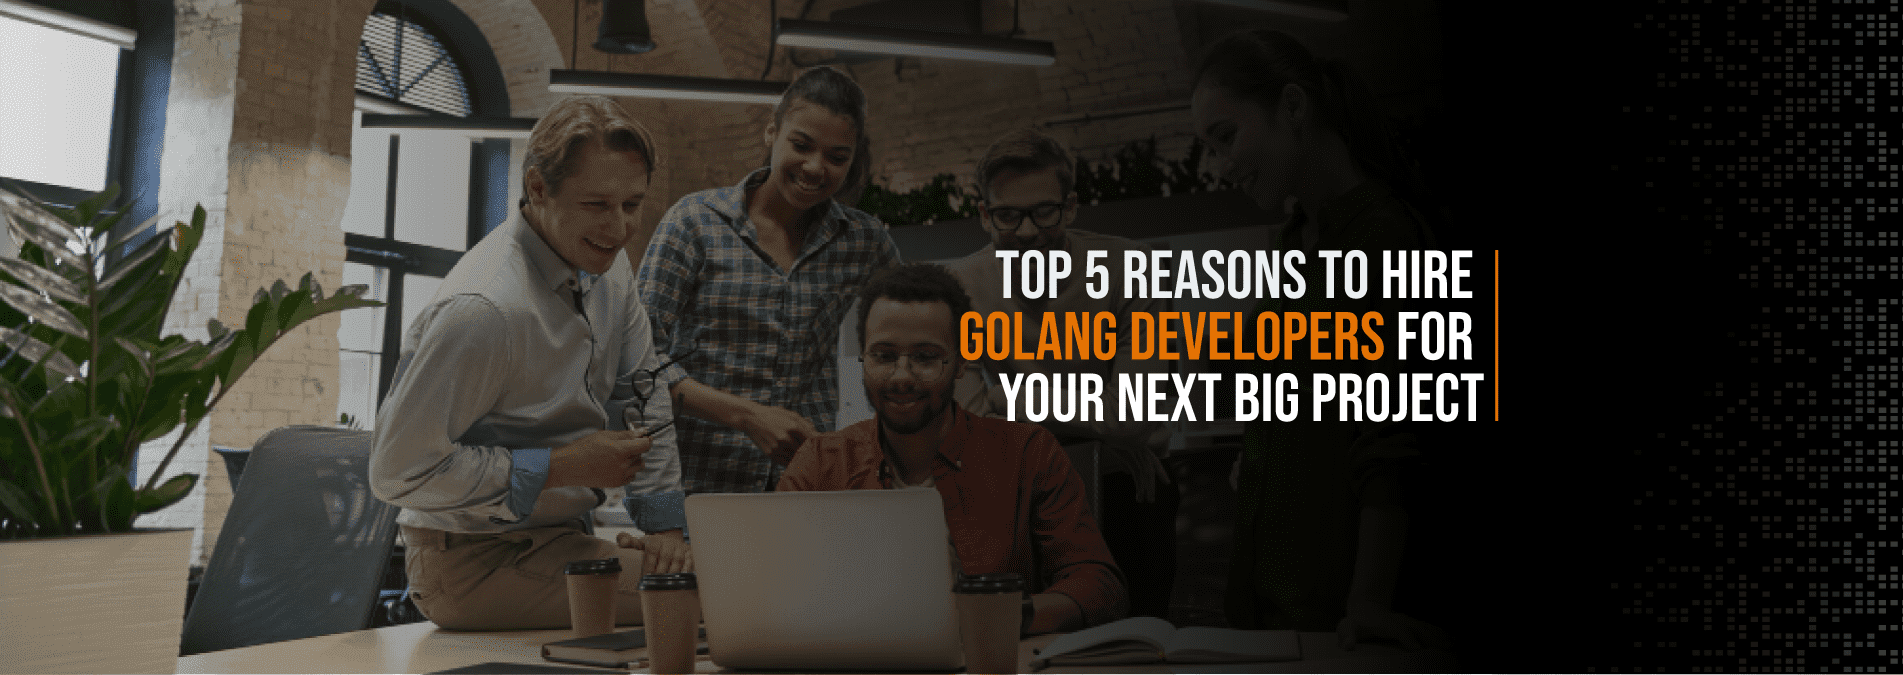 Top-5-Reasons-to-Hire-Golang-Developers-for-Your-Next-Big-Project Internet Soft